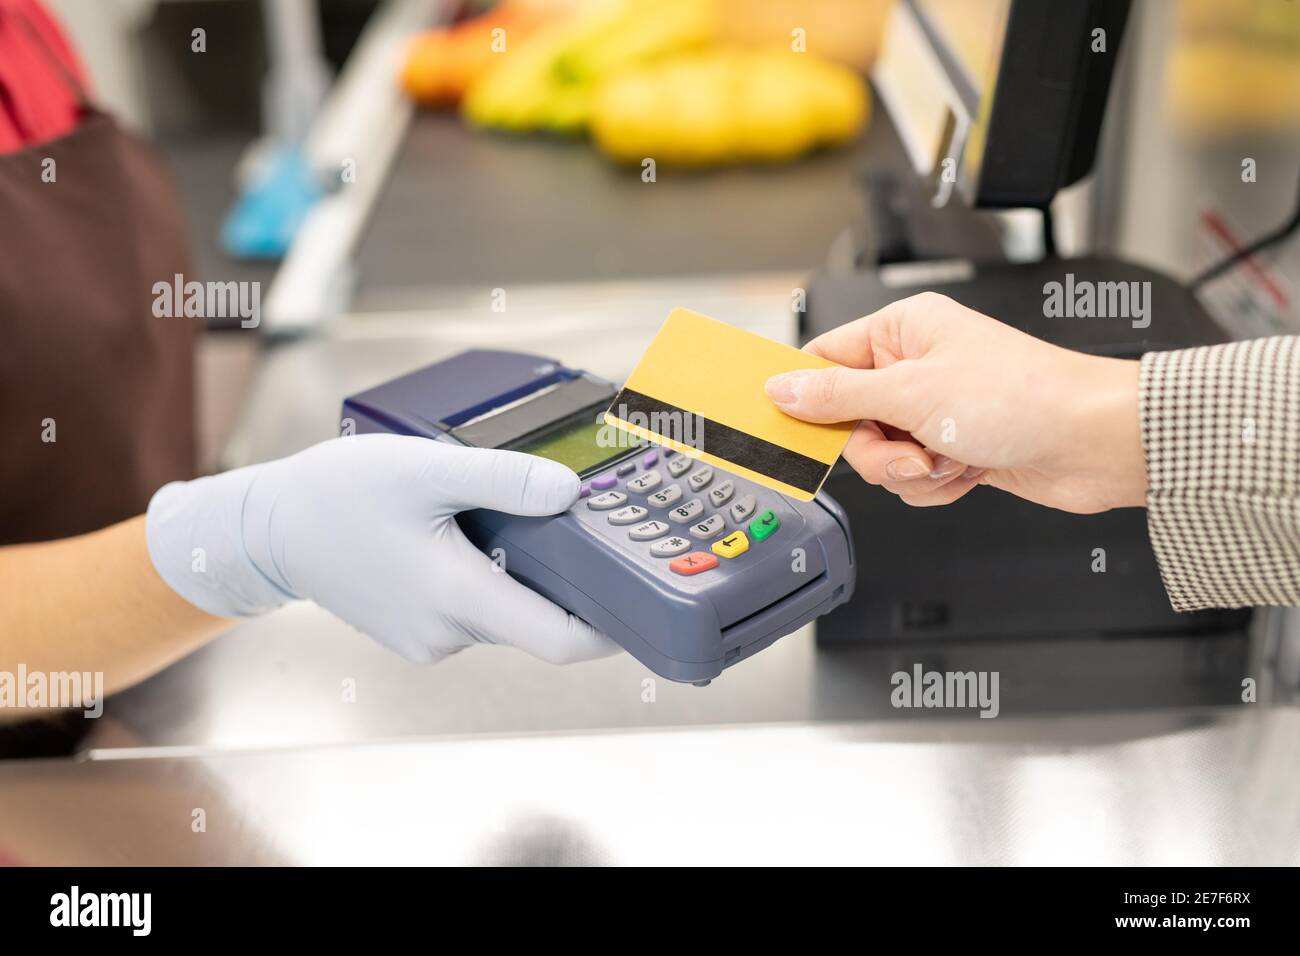 Hand of young female cashier in uniform and protective gloves holding payment terminal while one of consumers paying by credit card Stock Photo